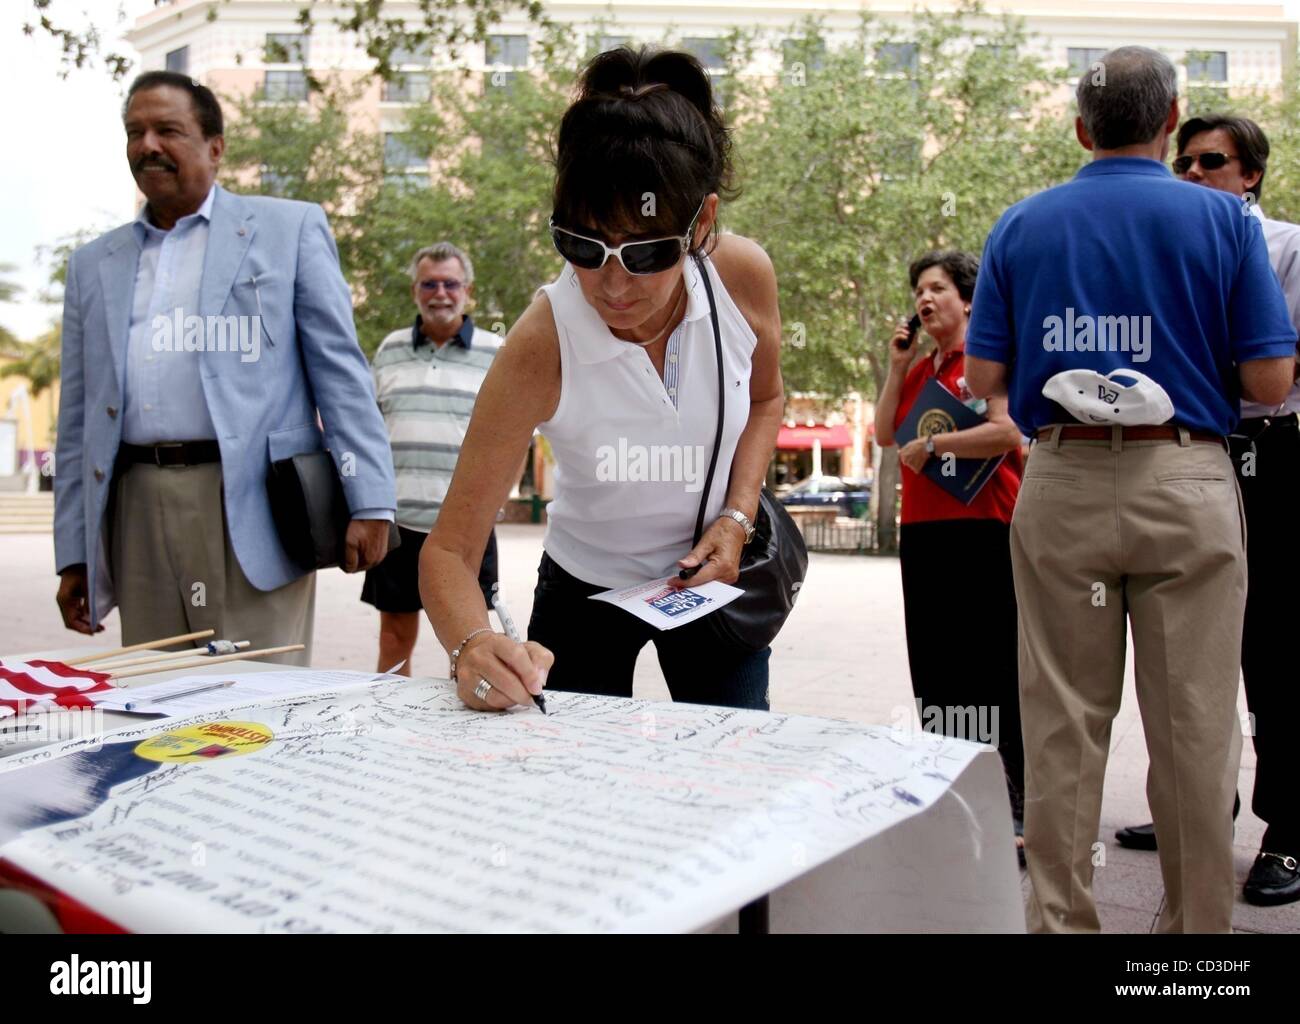 Apr 26, 2008 - Stuart, Florida, USA - SANDRA GEC, of Boynton Beach, signs a petition asking the Democratic National Committee to count Florida votes from the primary held in January at a Florida Demands Representation rally at the public library in West Palm Beach Saturday.  (Credit Image: Â© Gary C Stock Photo